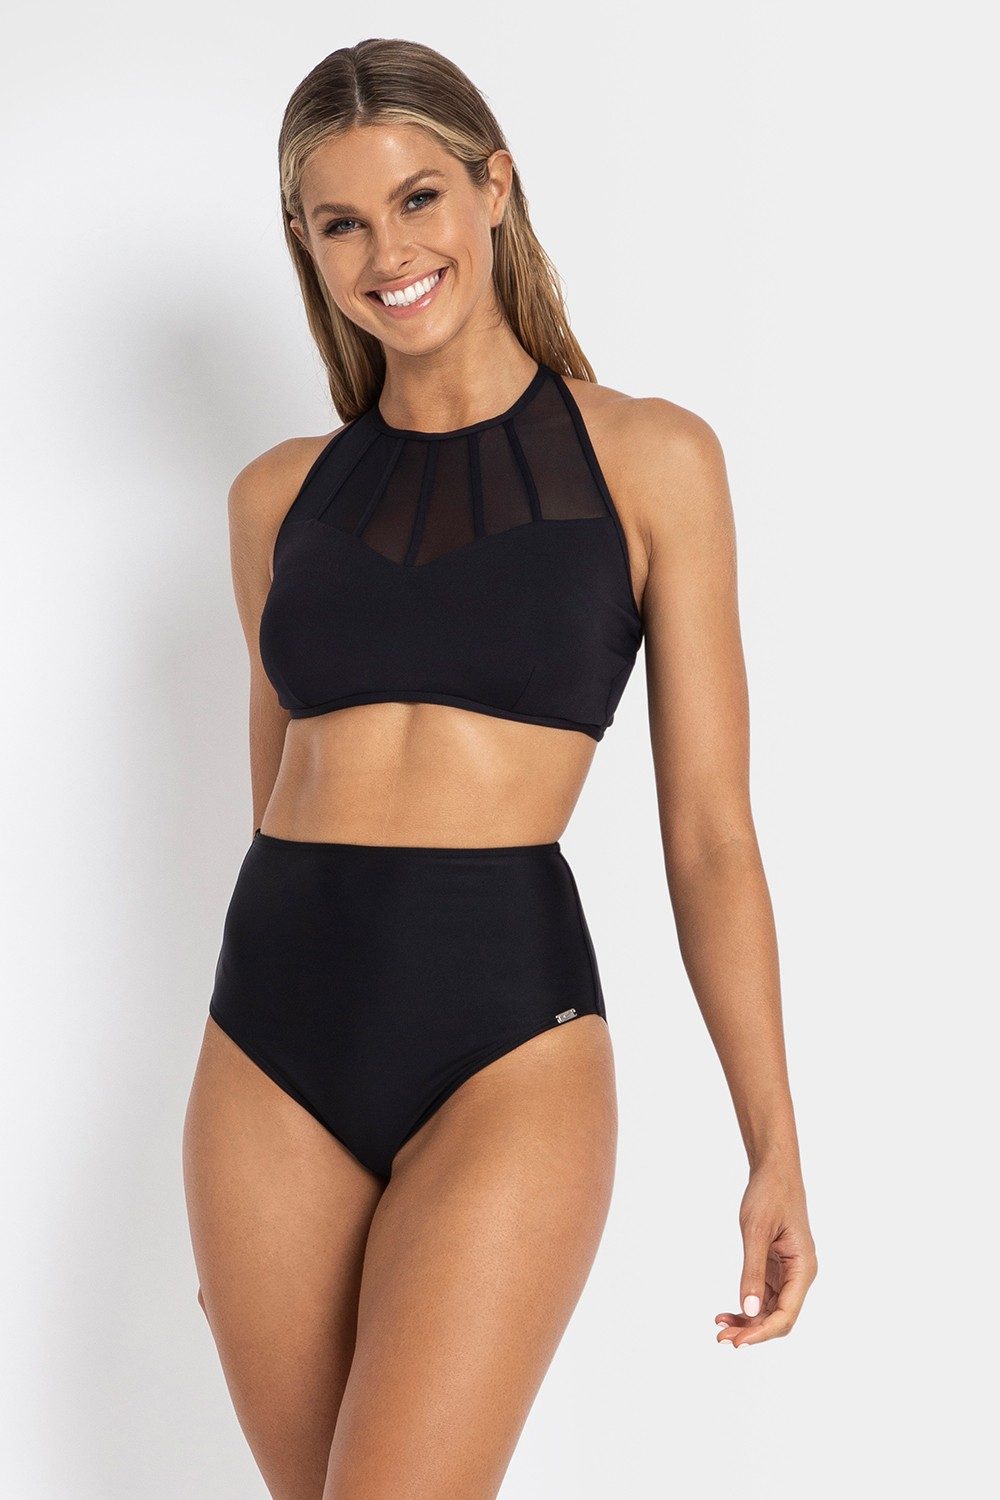 SALE* Mastectomy Swimsuit 'Palm Beach Ultimate Mesh High Neck One